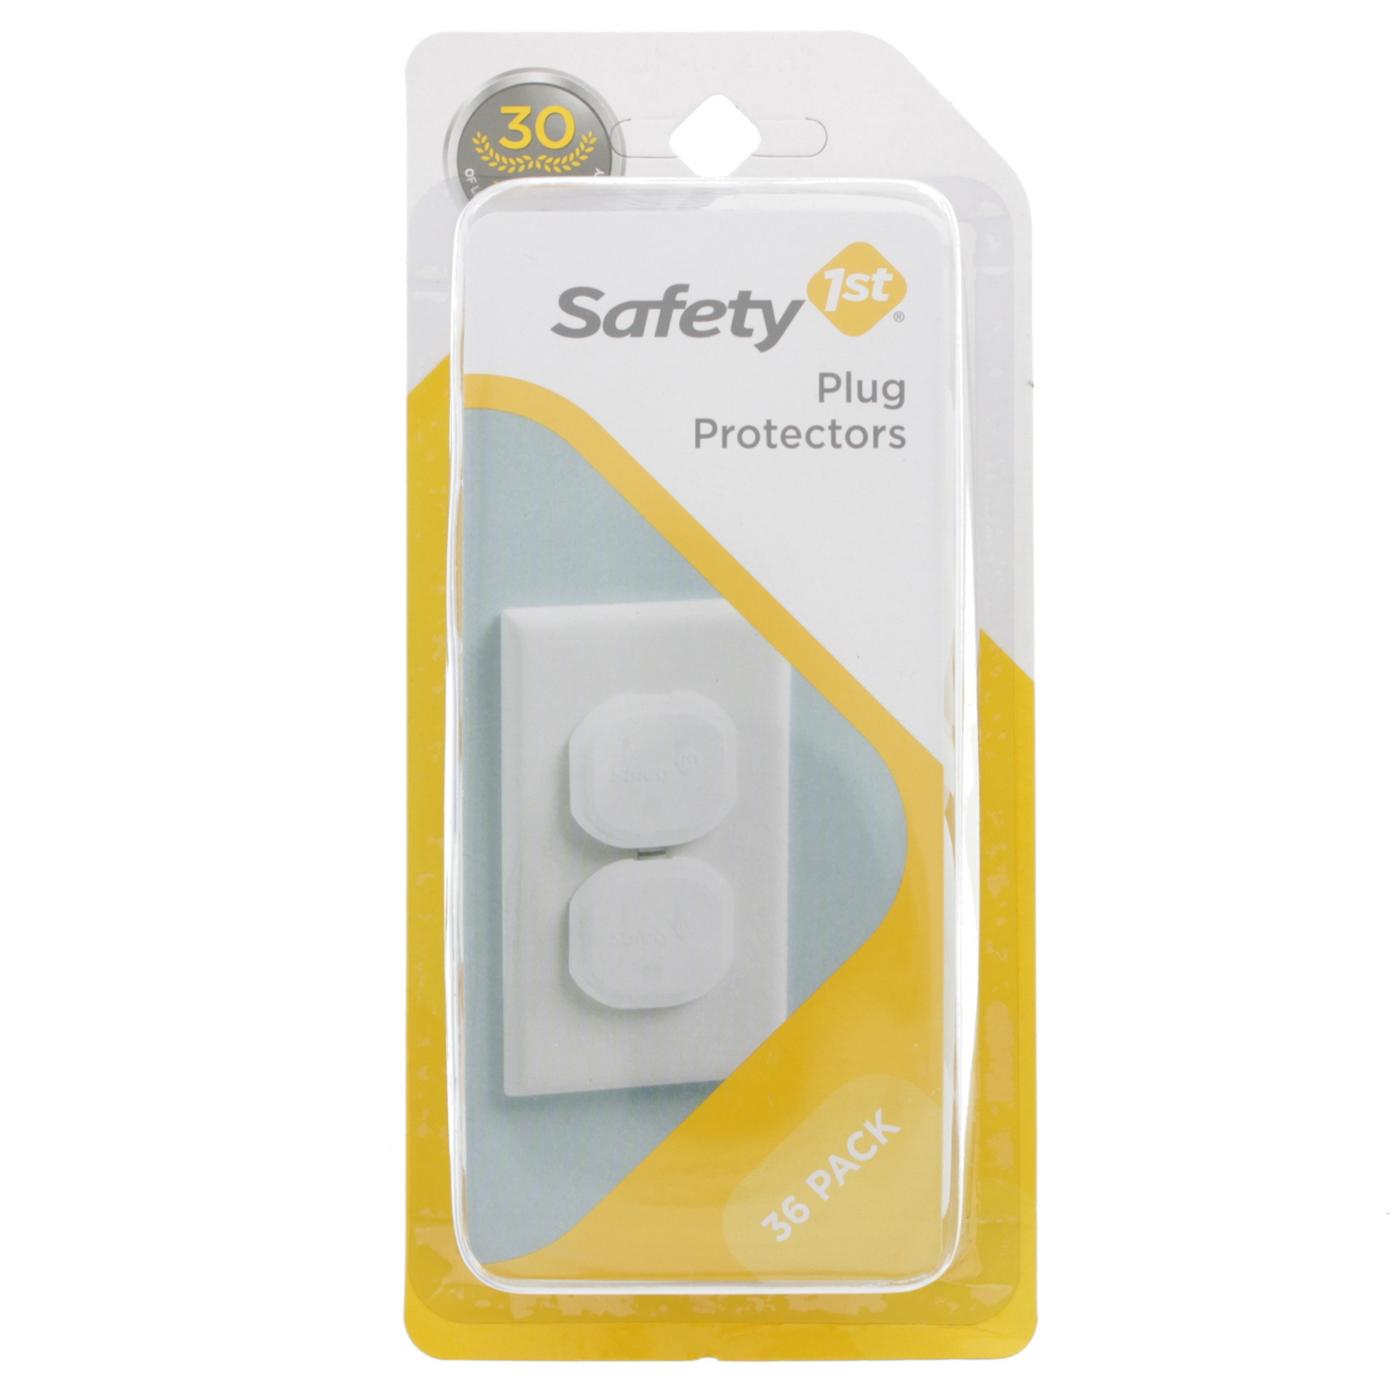 Safety 1st Plug Protectors; image 1 of 2